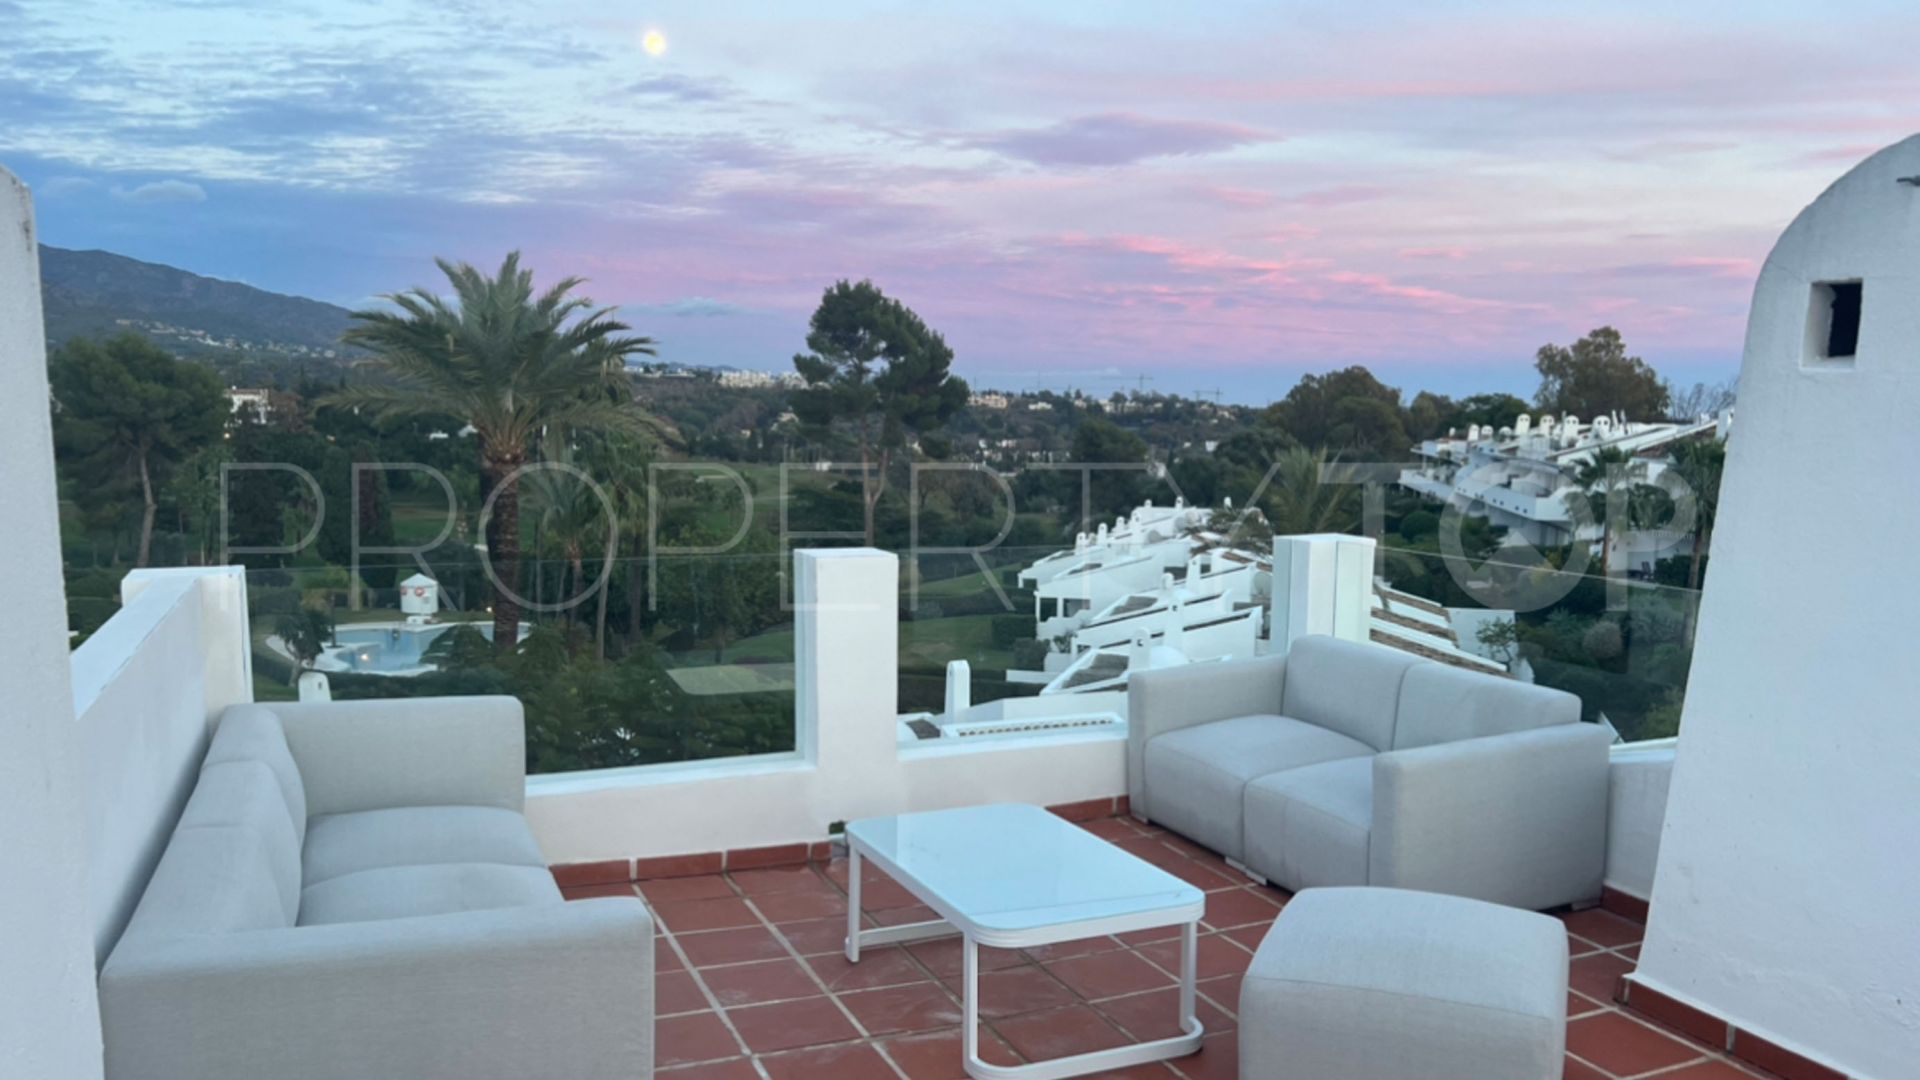 For sale 2 bedrooms duplex penthouse in Los Dragos